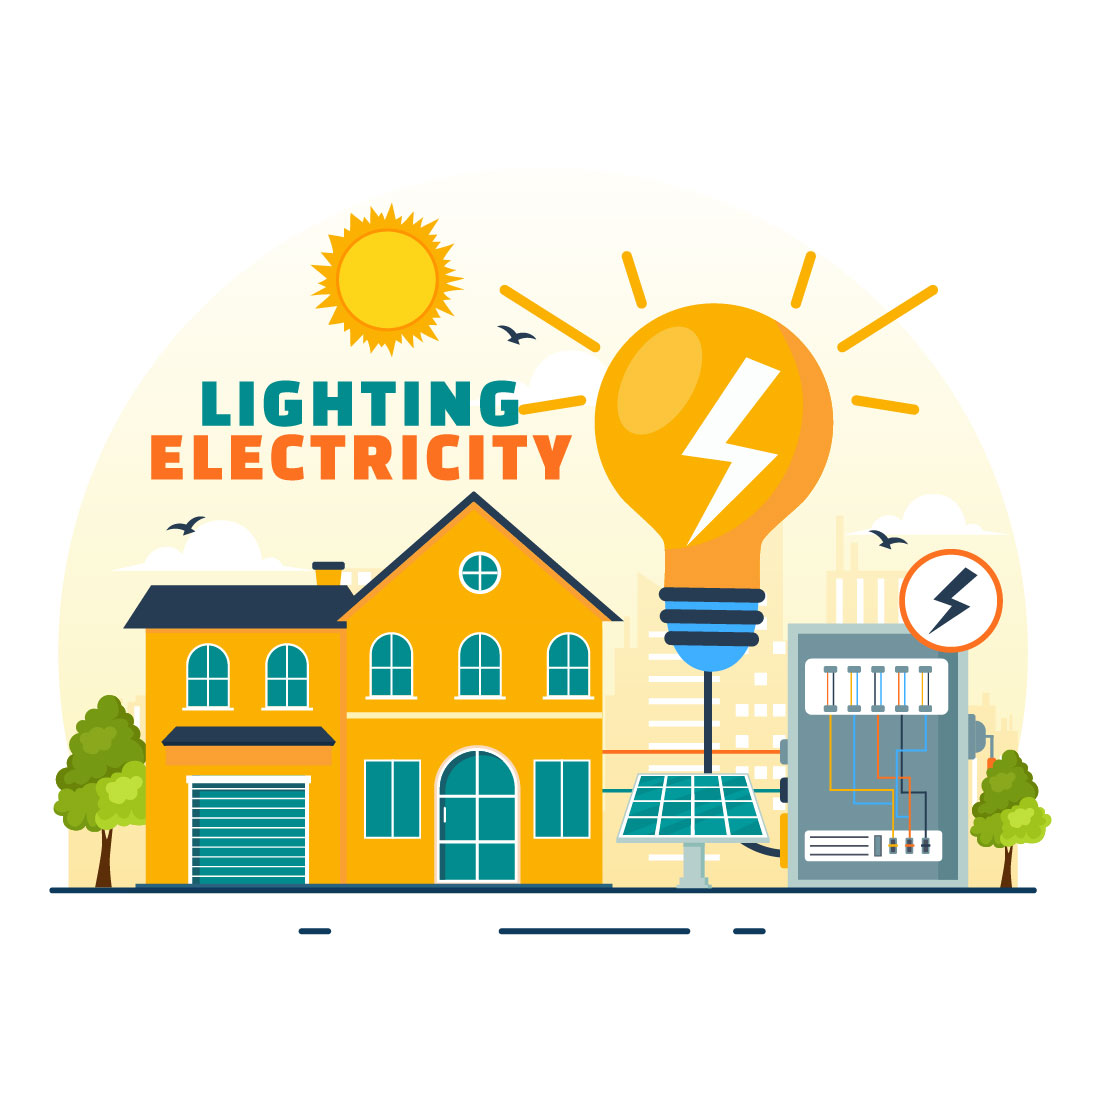 10 Lighting and Electricity Energy Illustration cover image.